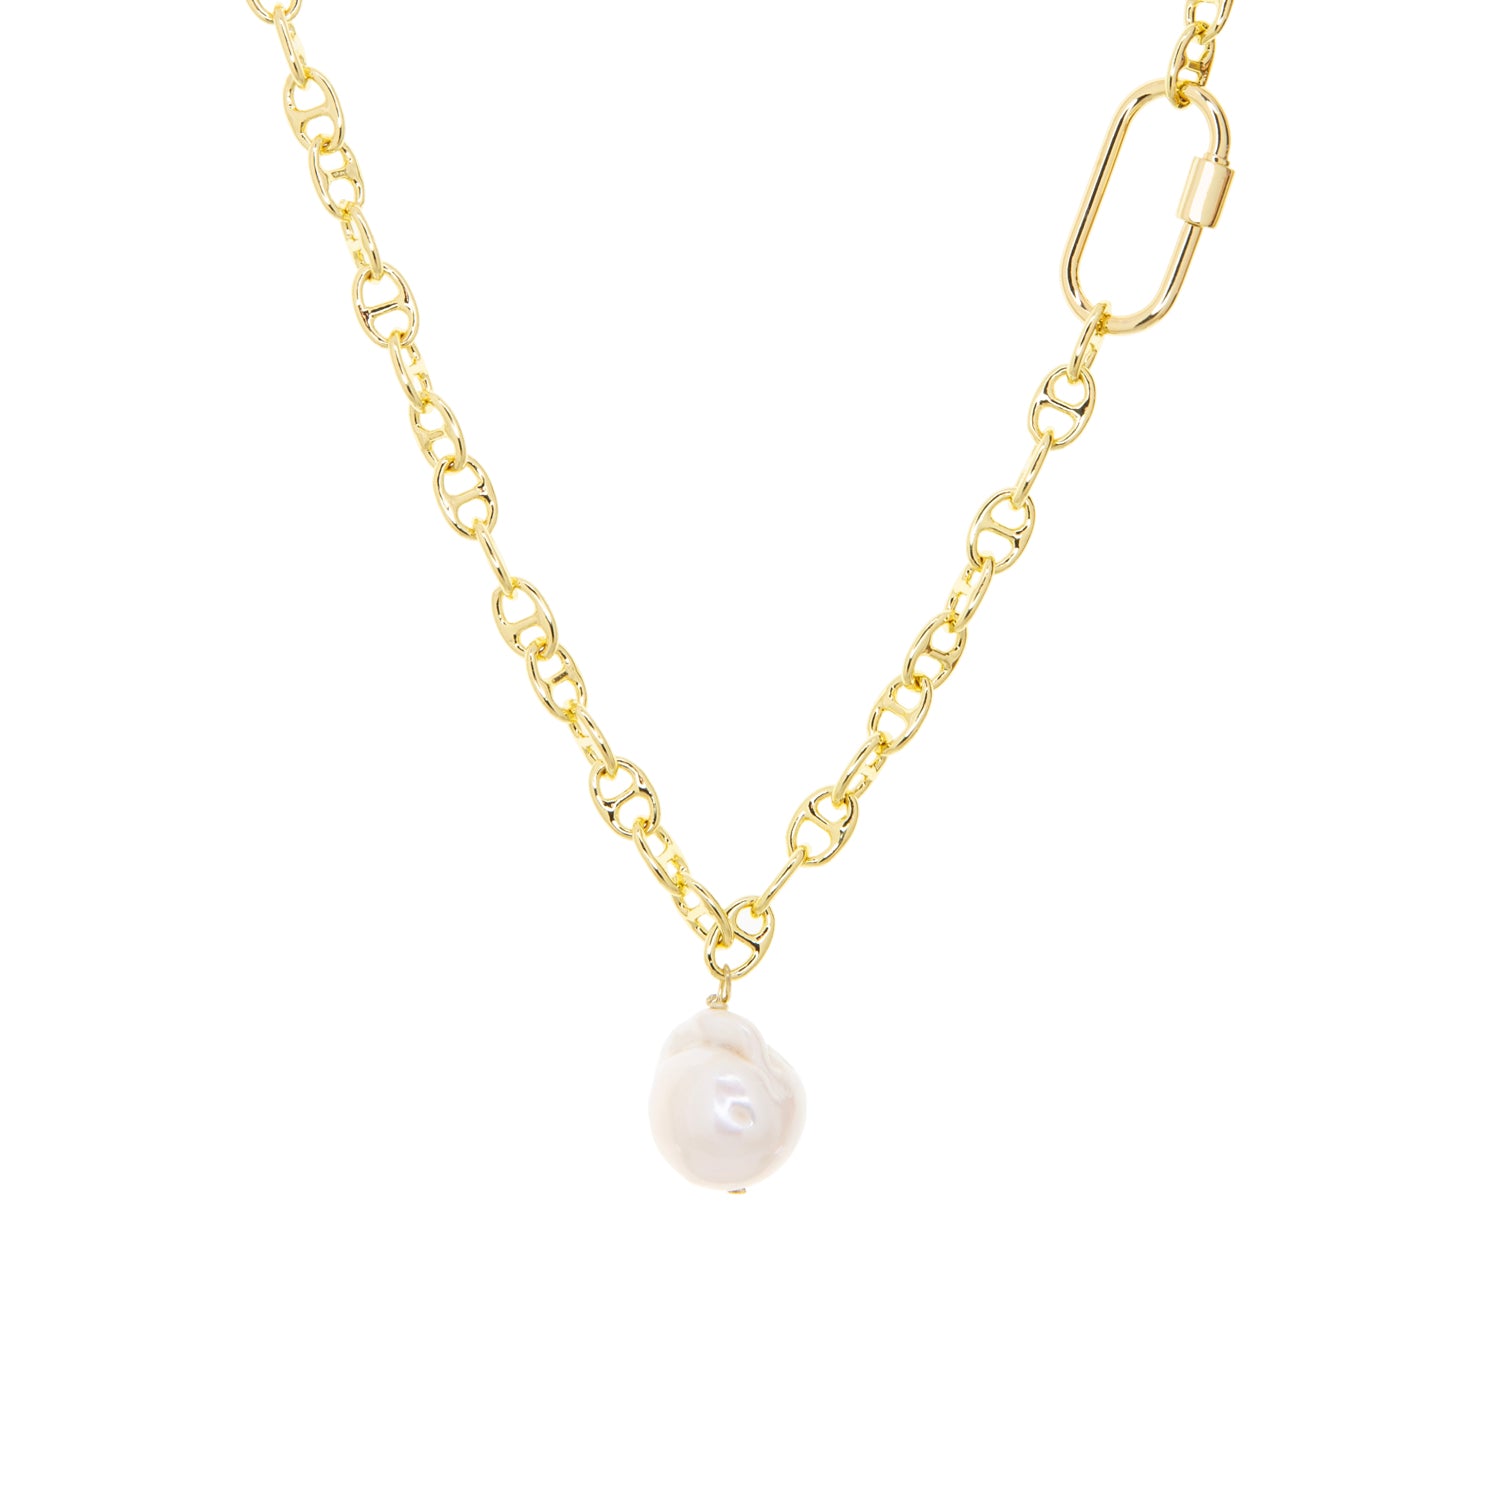 brass gucci link chain with pearl pendant